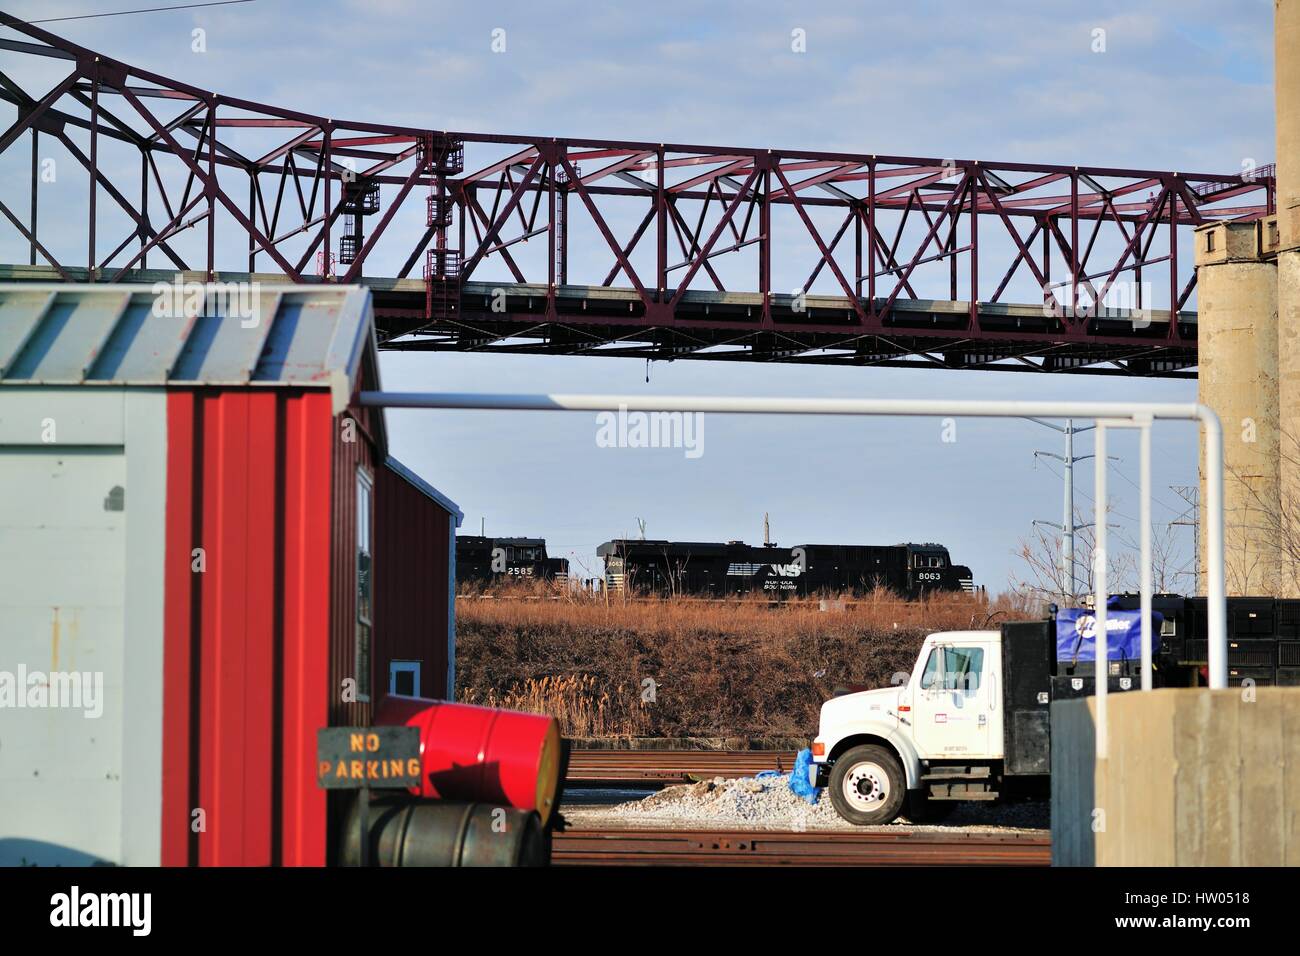 Chicago, Illinois, USA. A Norfolk Southern Railroad freight train making its way through a heavily industrial area on the southeast side of the city. Stock Photo